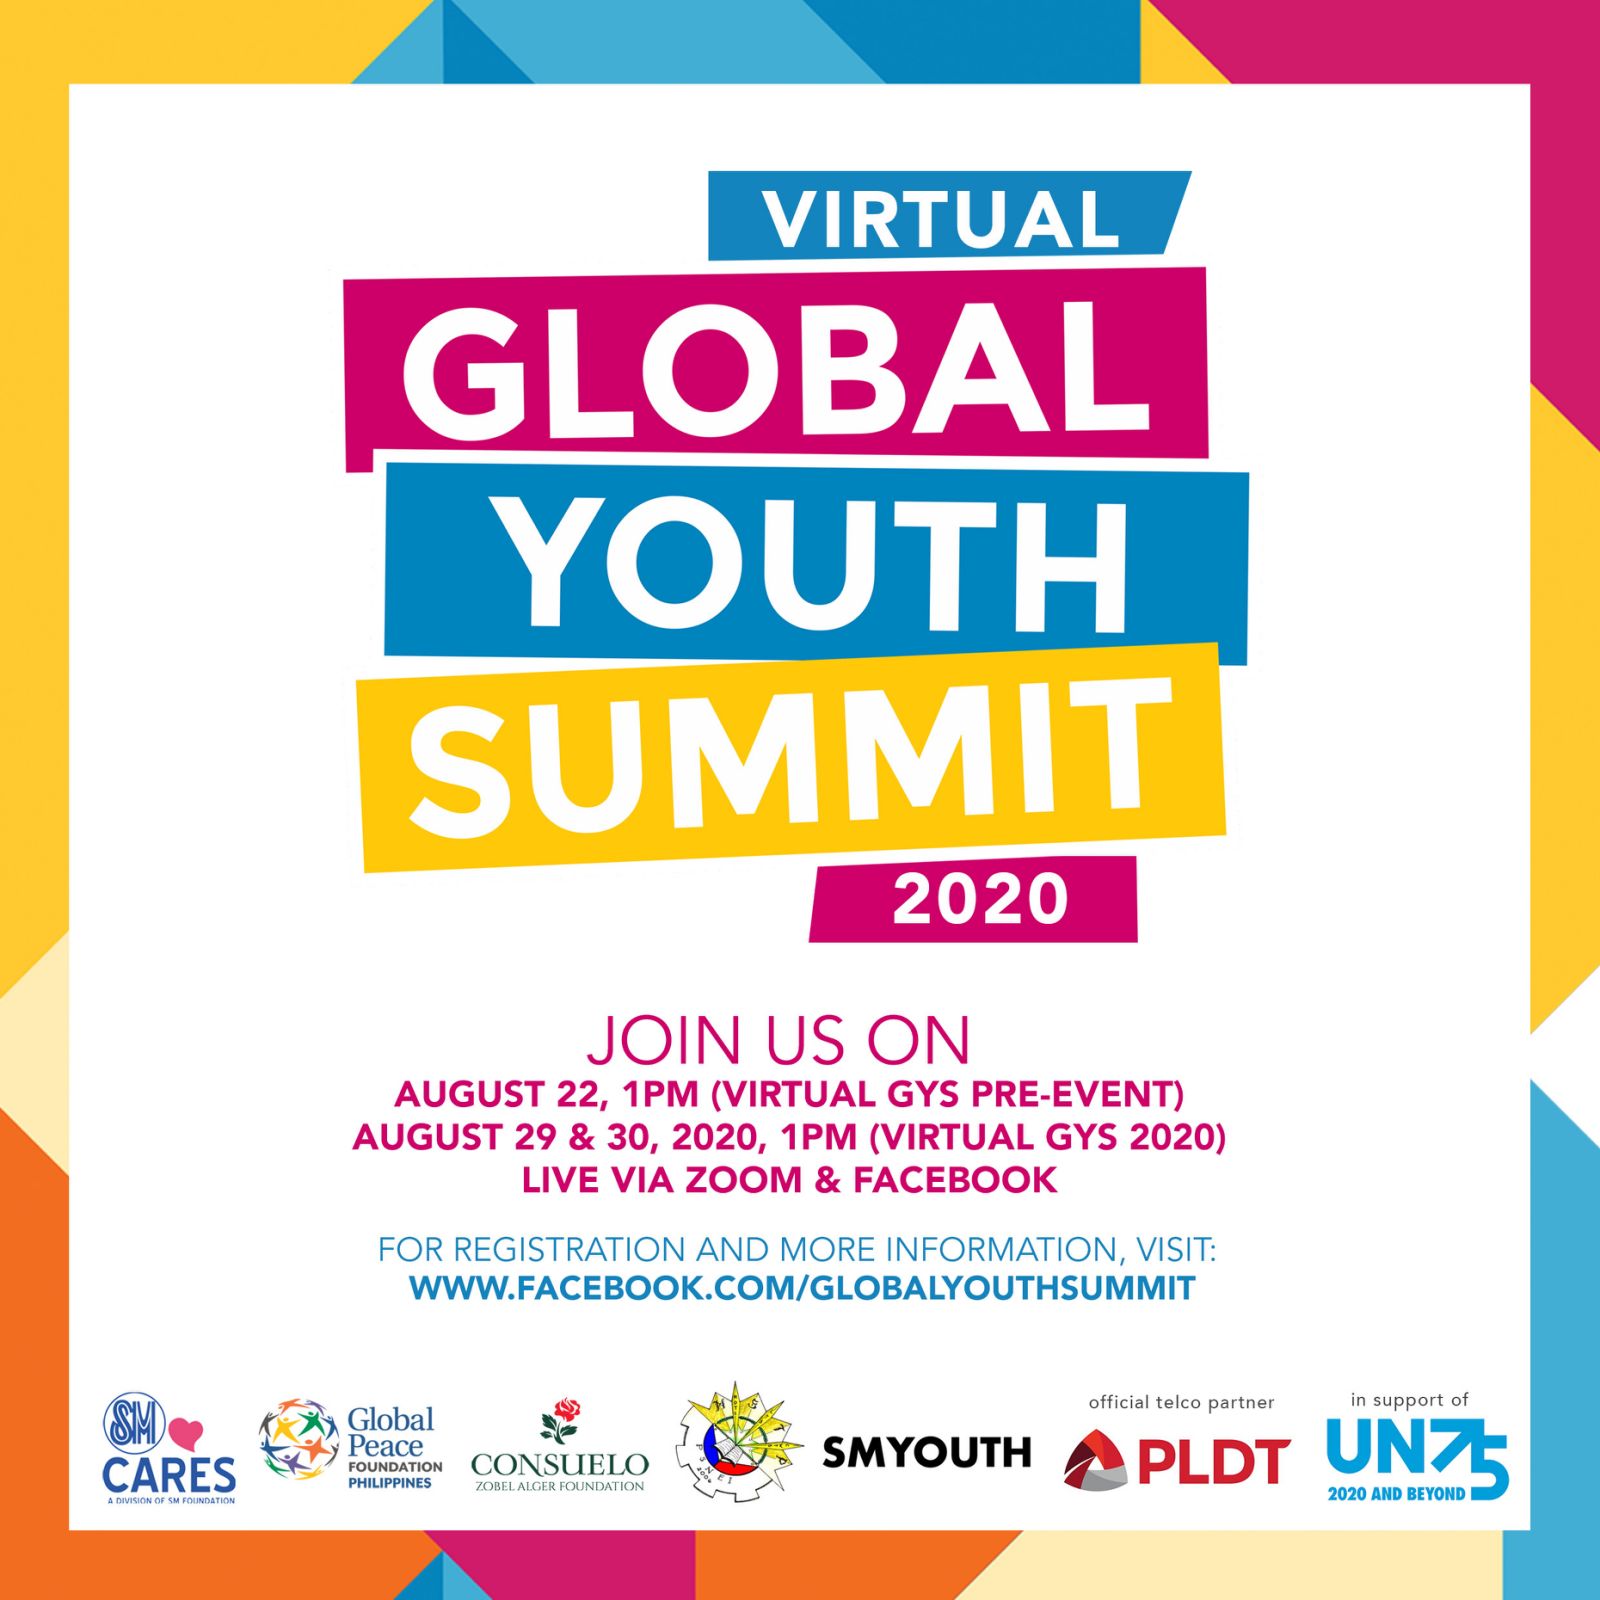 Global Peace Foundation, SM Cares to hold virtual Global Youth Summit from Aug. 29-30